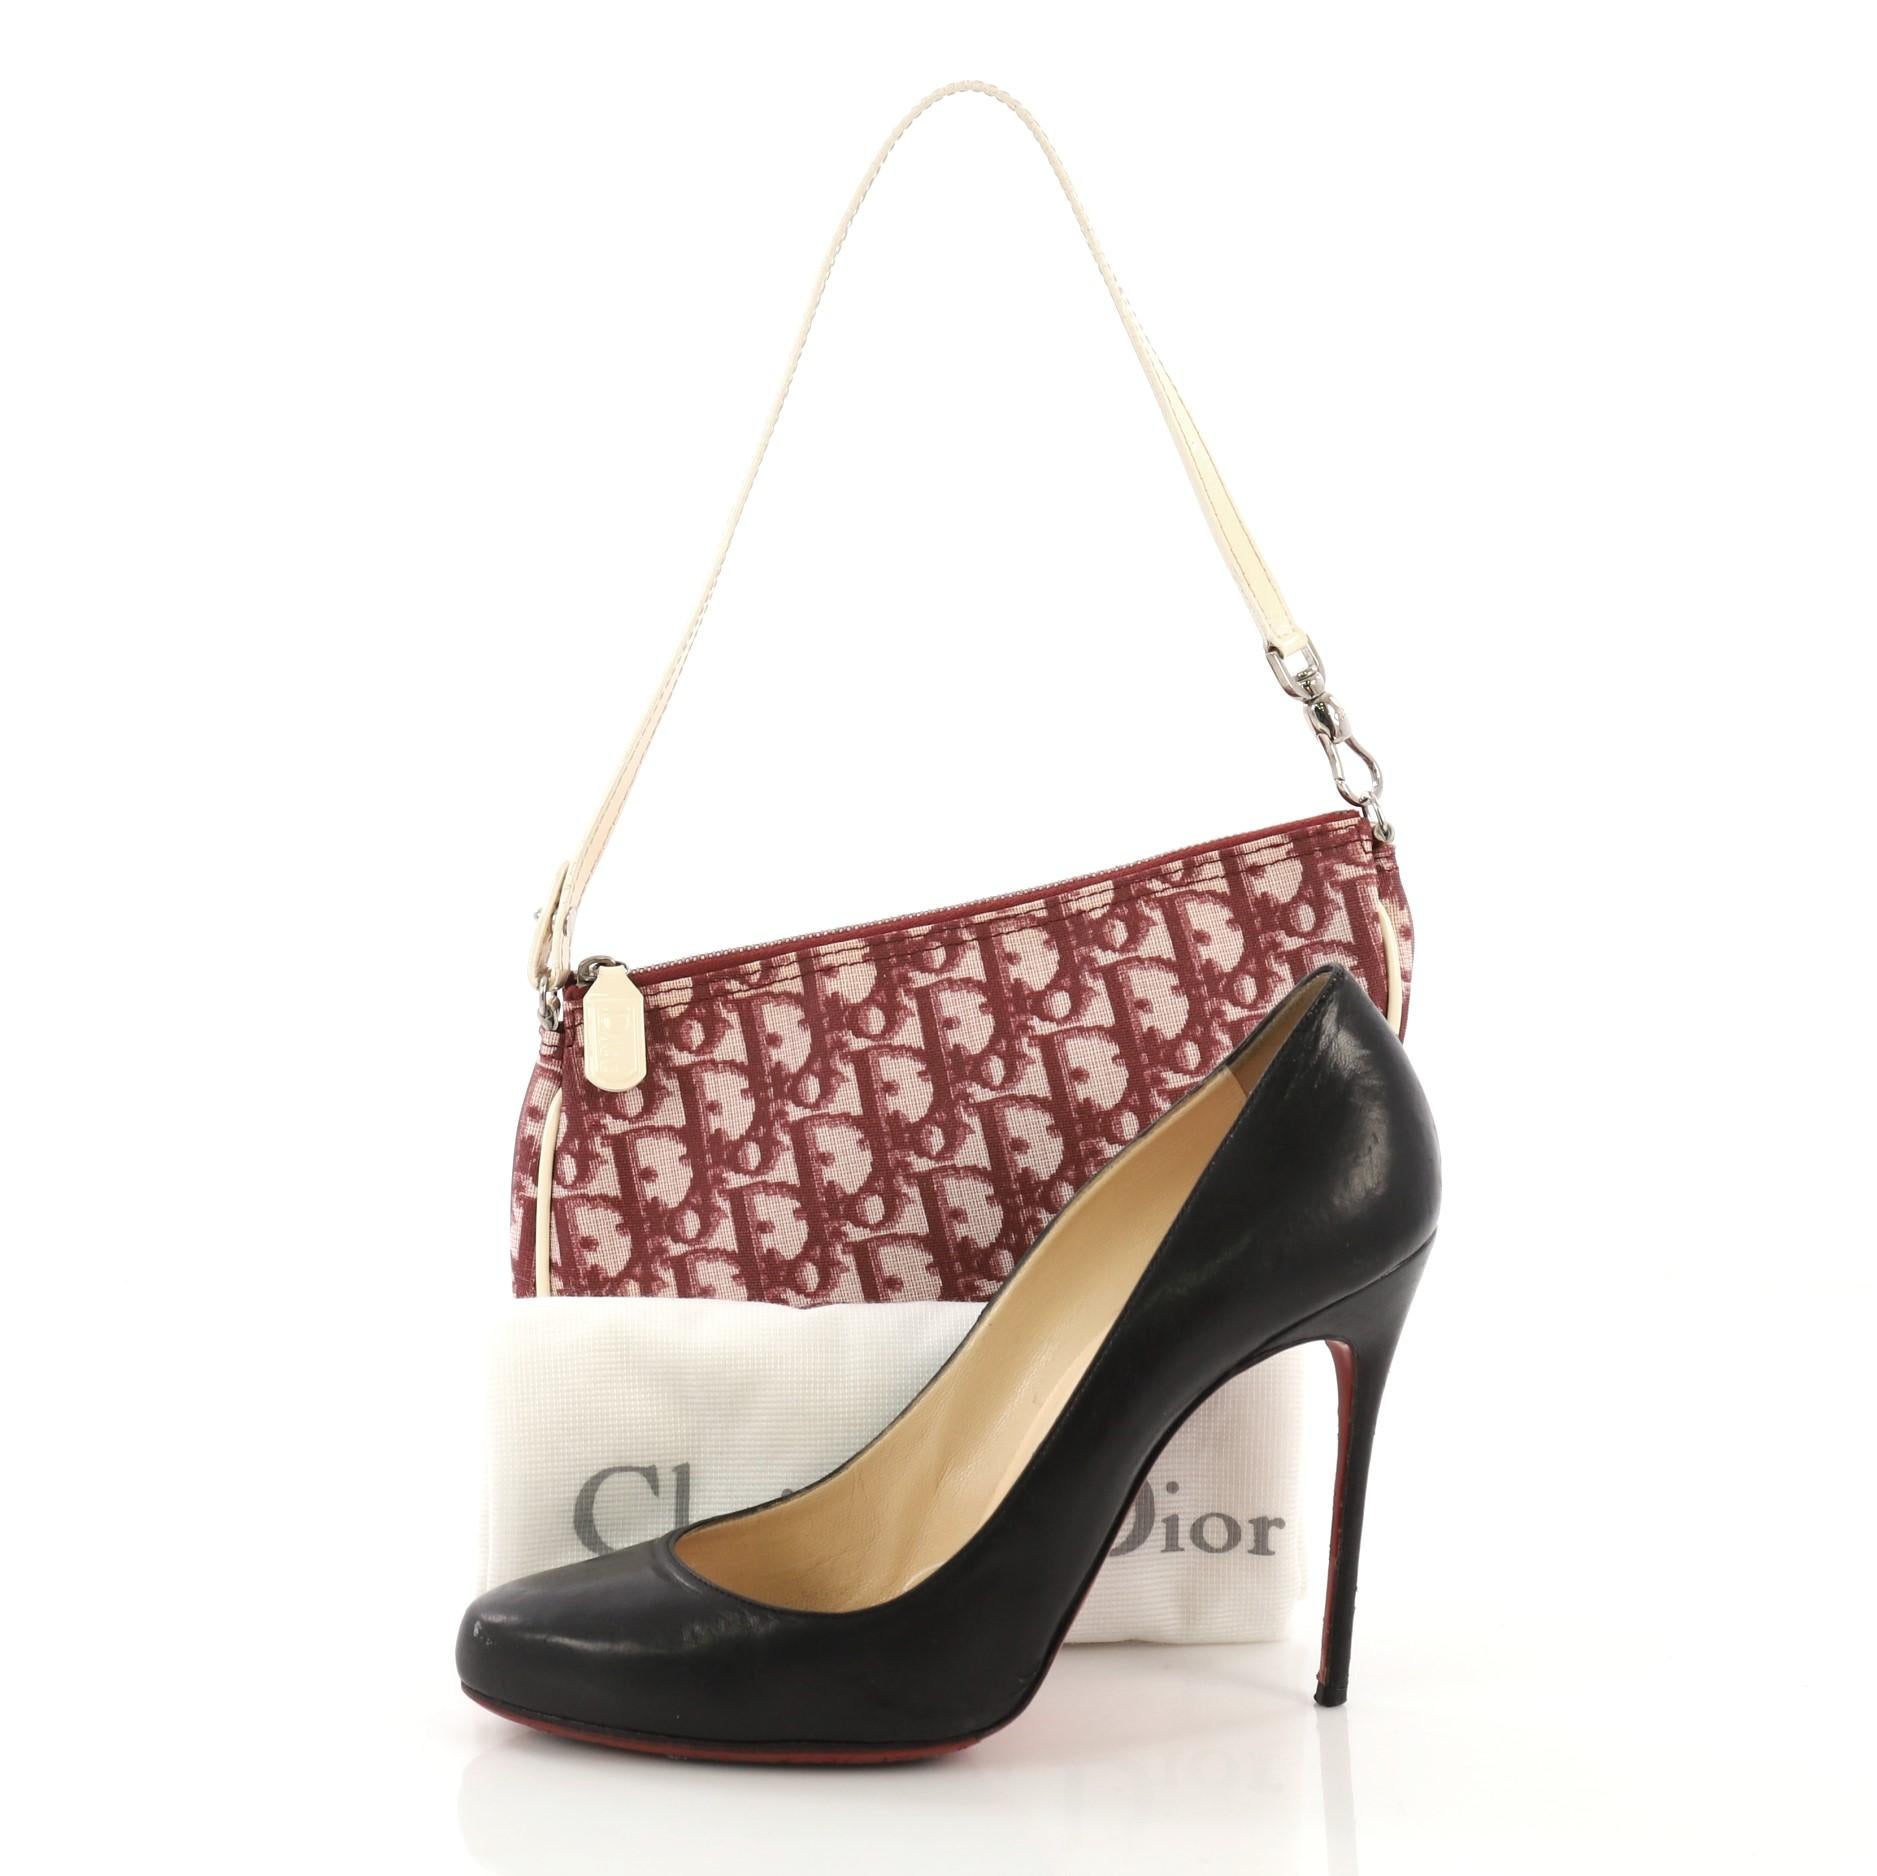 This Christian Dior Vintage Saddle Bag Diorissimo Canvas Mini, crafted from burgundy and white diorissimo canvas, features a top handle and aged silver-tone hardware. Its zip closure opens to a burgundy fabric interior. **Note: Shoe photographed is